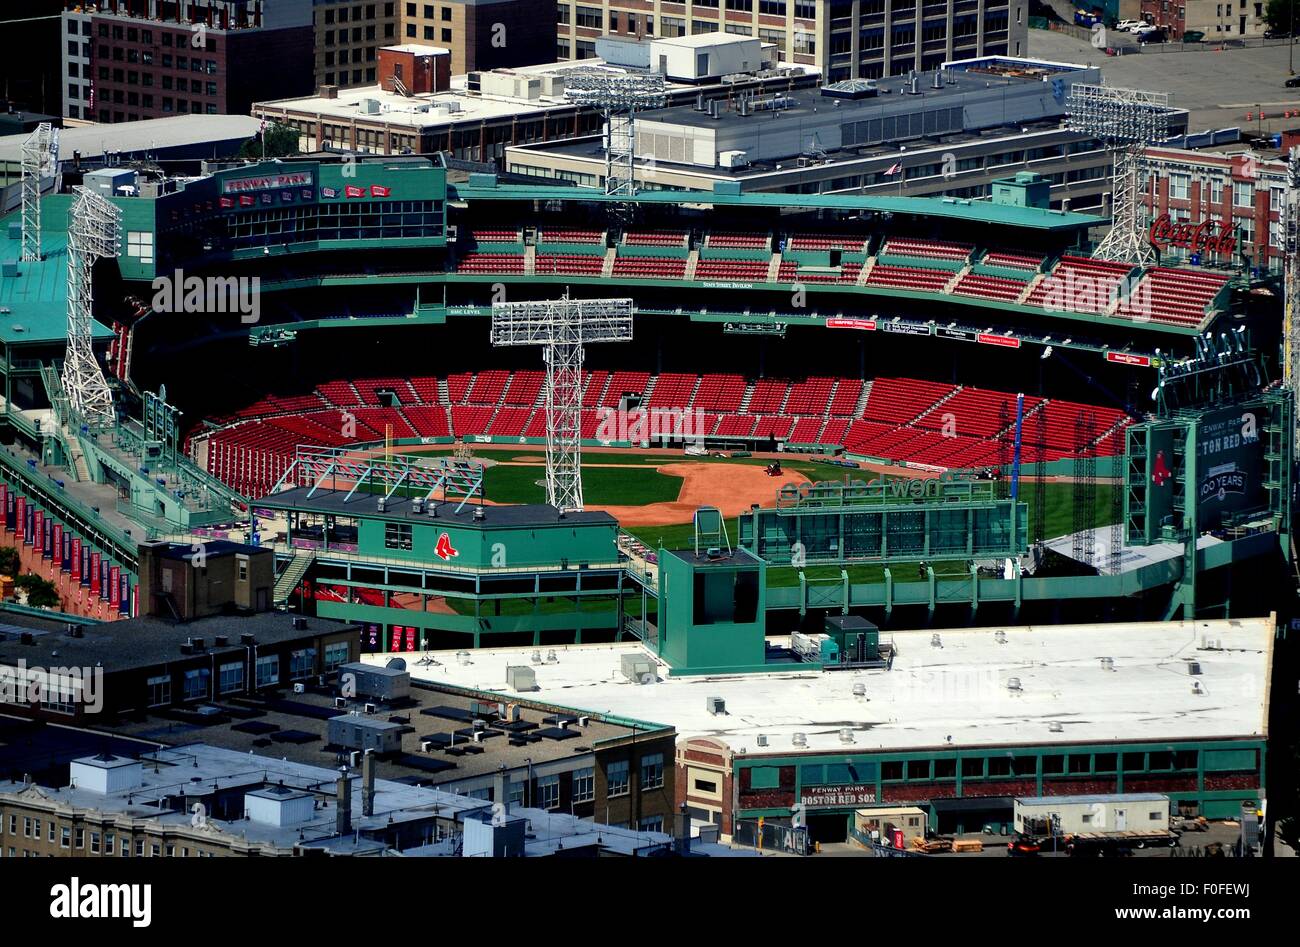 At Fenway Park, home of the Boston Red Sox, seating is limited to